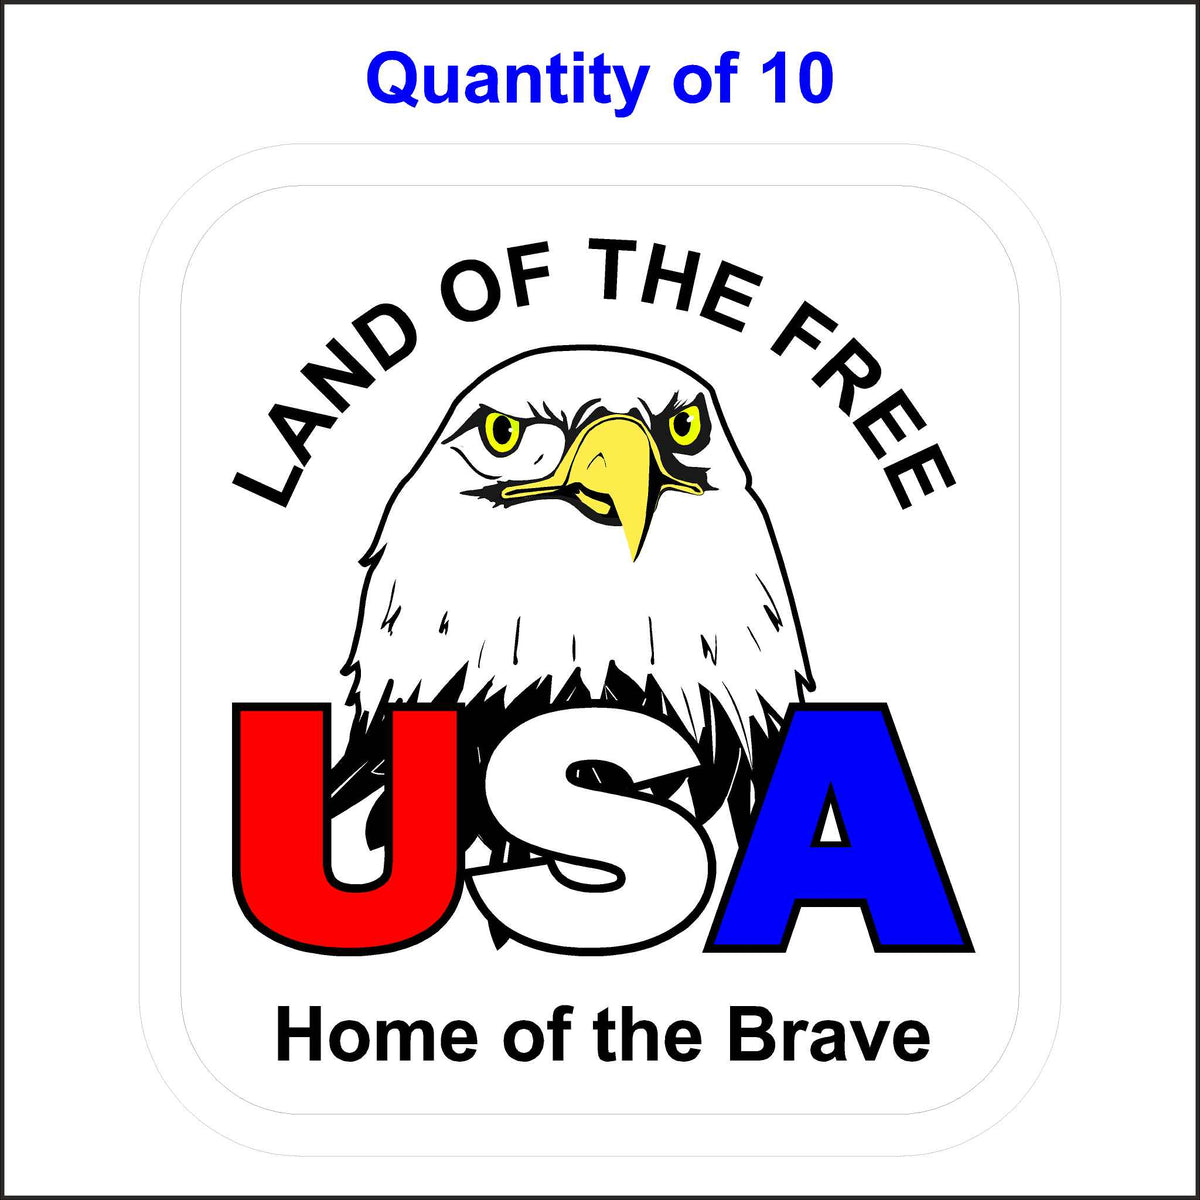 USA Land of the Free Home of the Brave Patriotic Sticker. This Sticker Has and Eagle and in Printed in Red, White, and Blue. 10 Quantity.